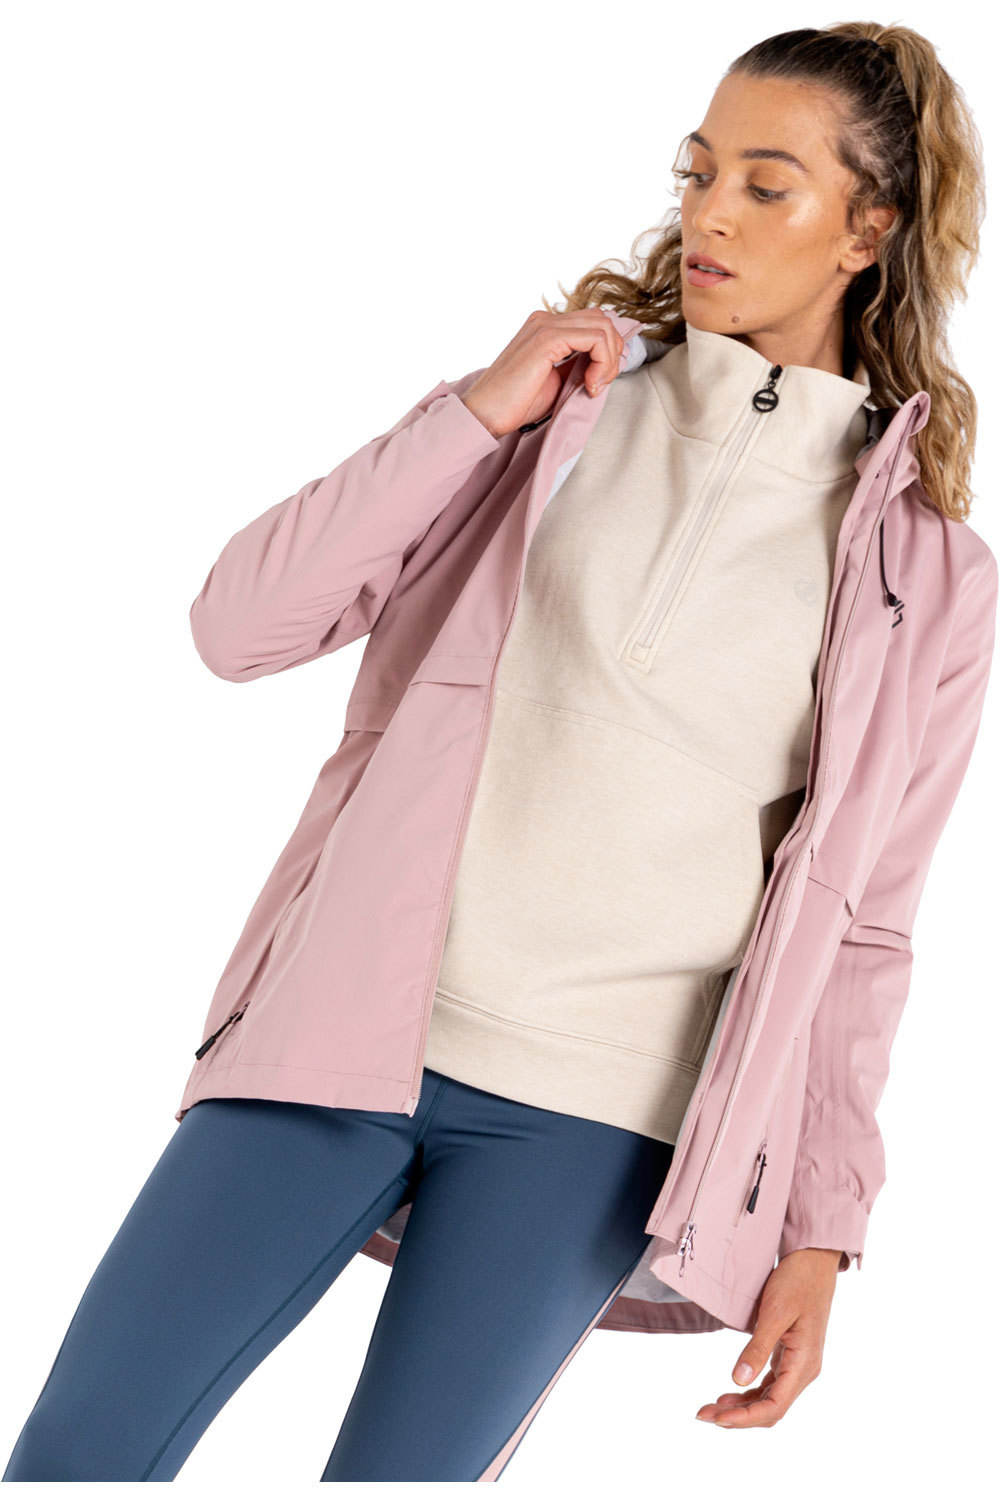 Dare2b chaqueta impermeable mujer Switch Up Jacket vista frontal